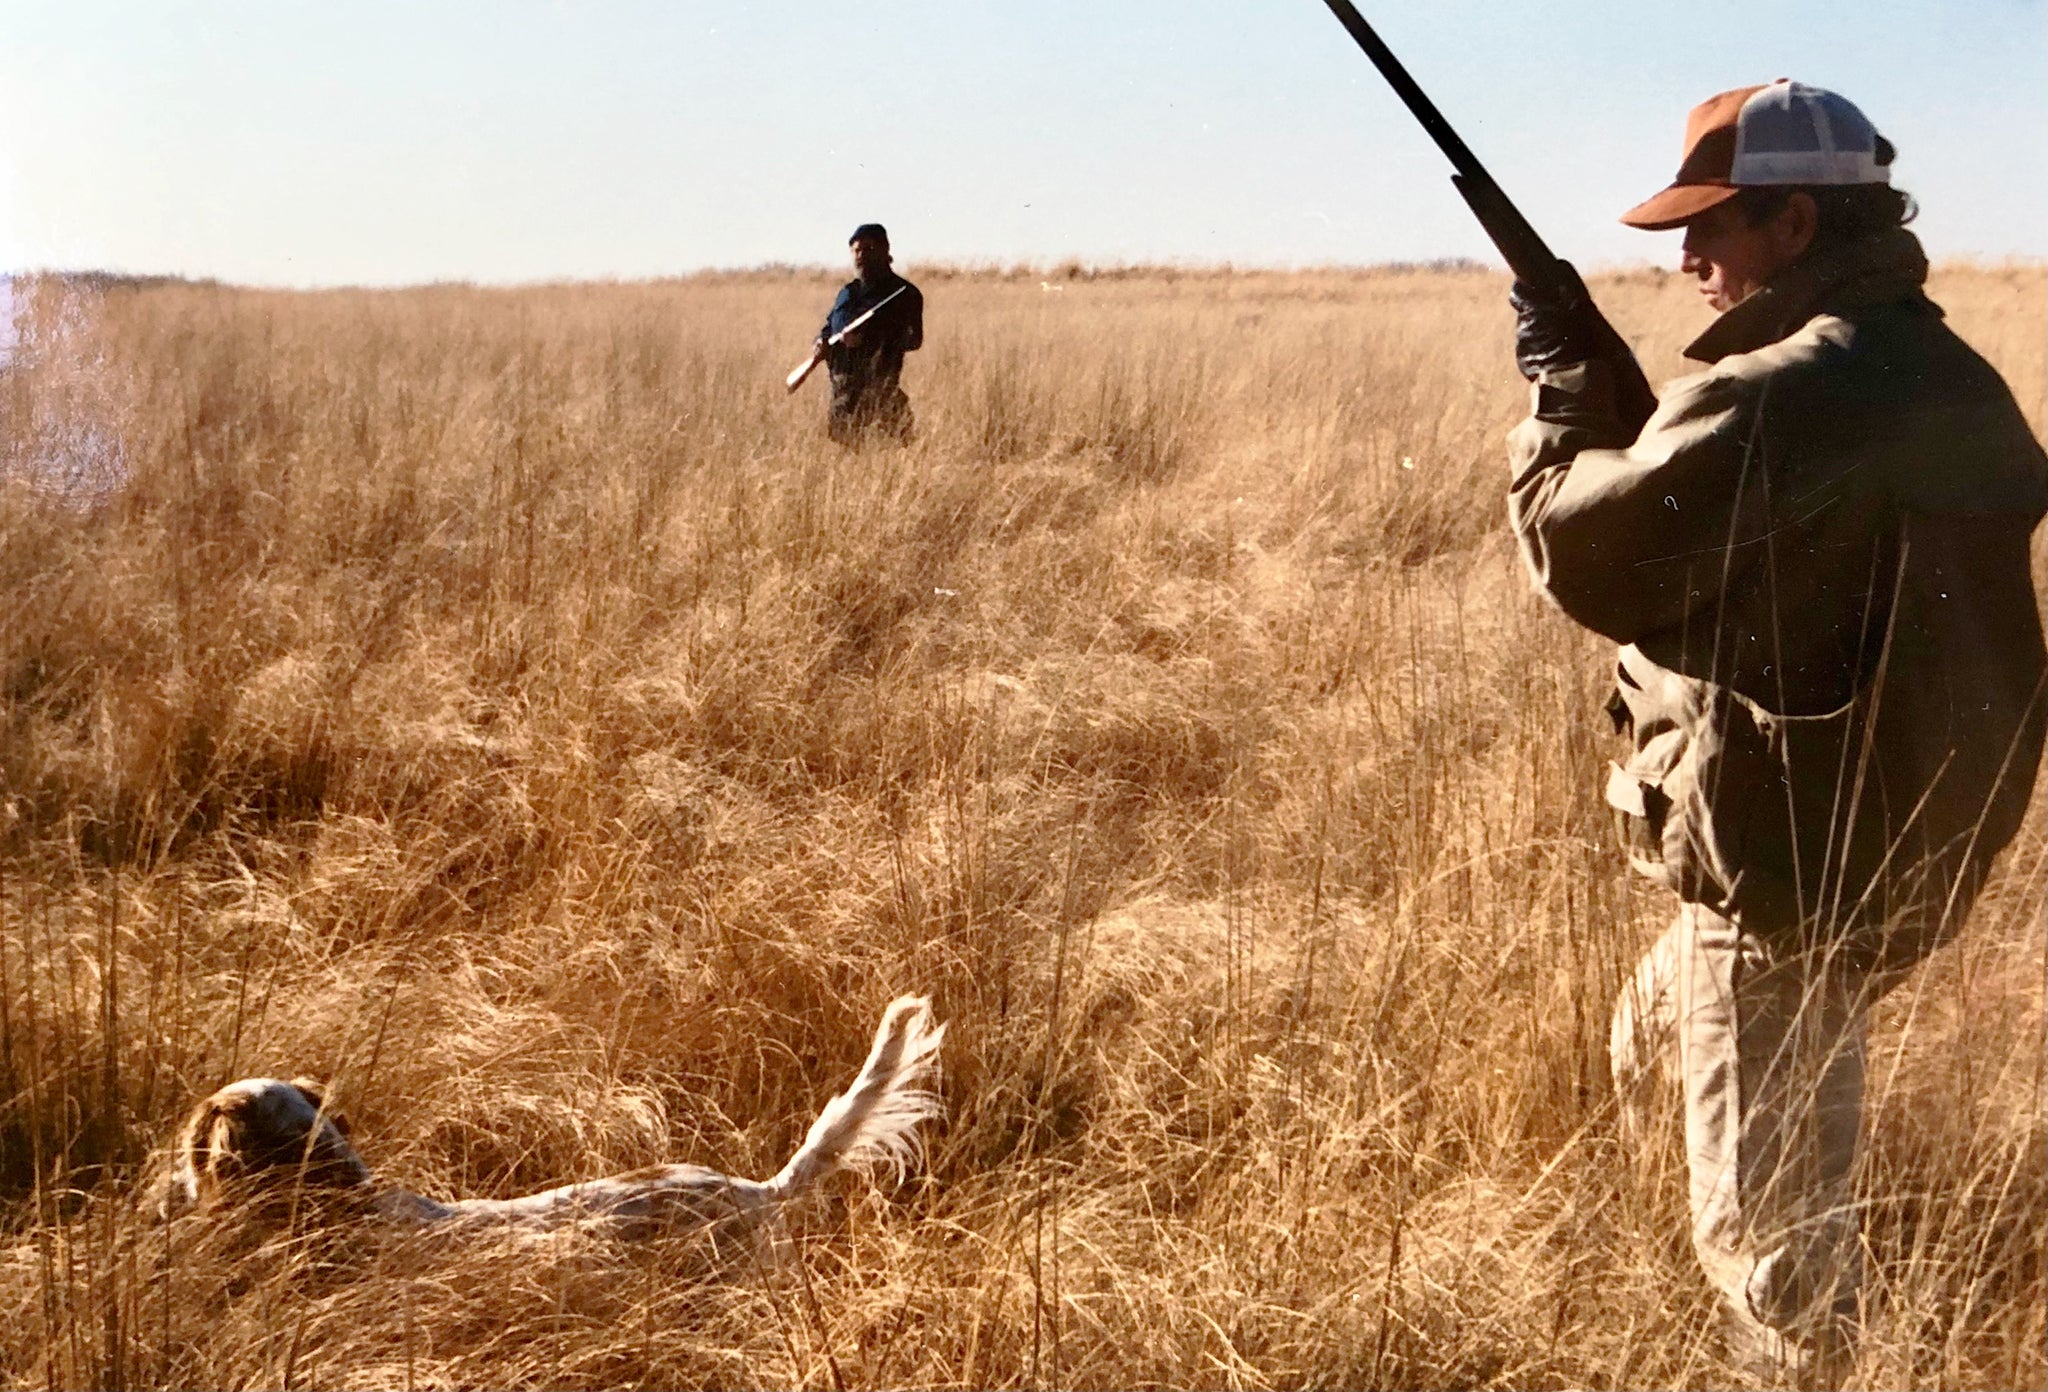 Erney and Dan hunting on the prairie